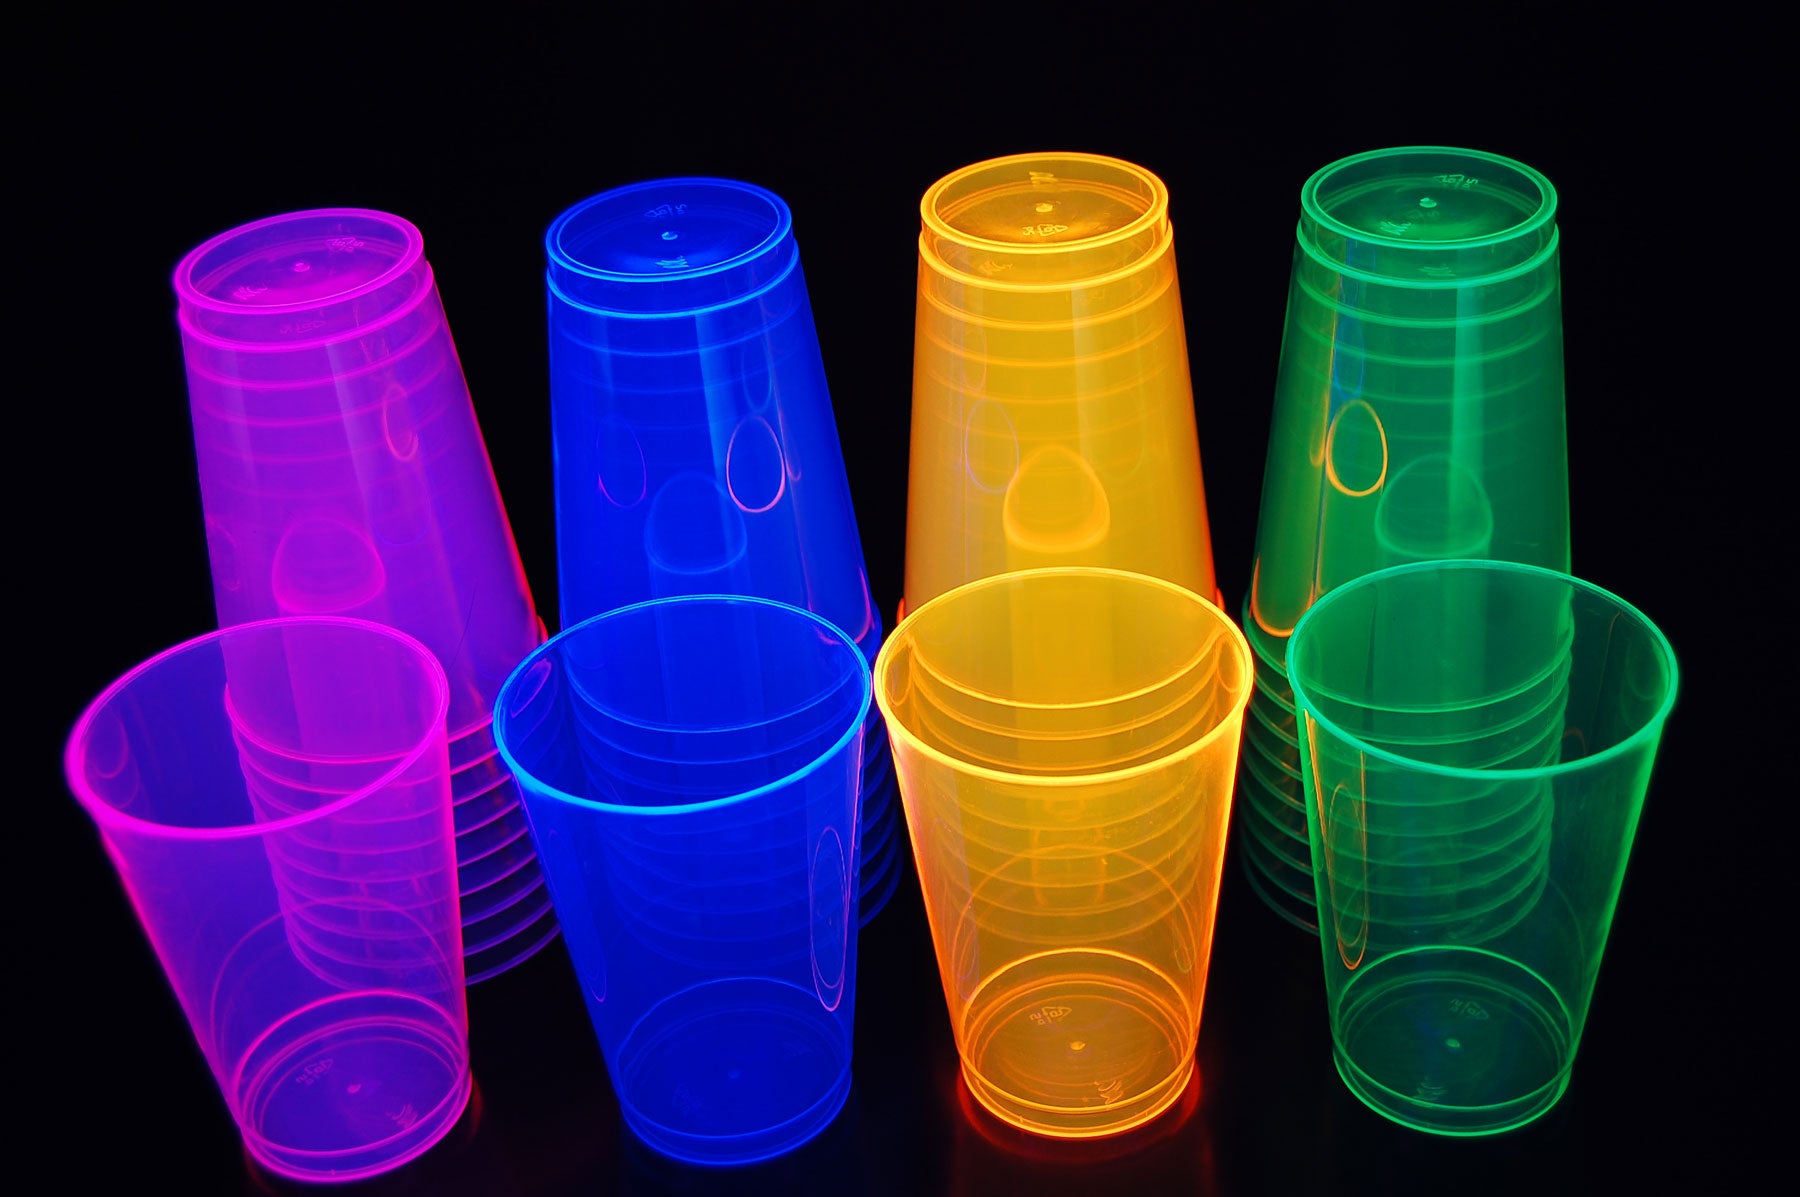 Exquisite Food Safe Blacklight Glow In The Dark Disposable Plastic Party  Glow Cups - Assorted Neon Colors-12 Ounce : Target